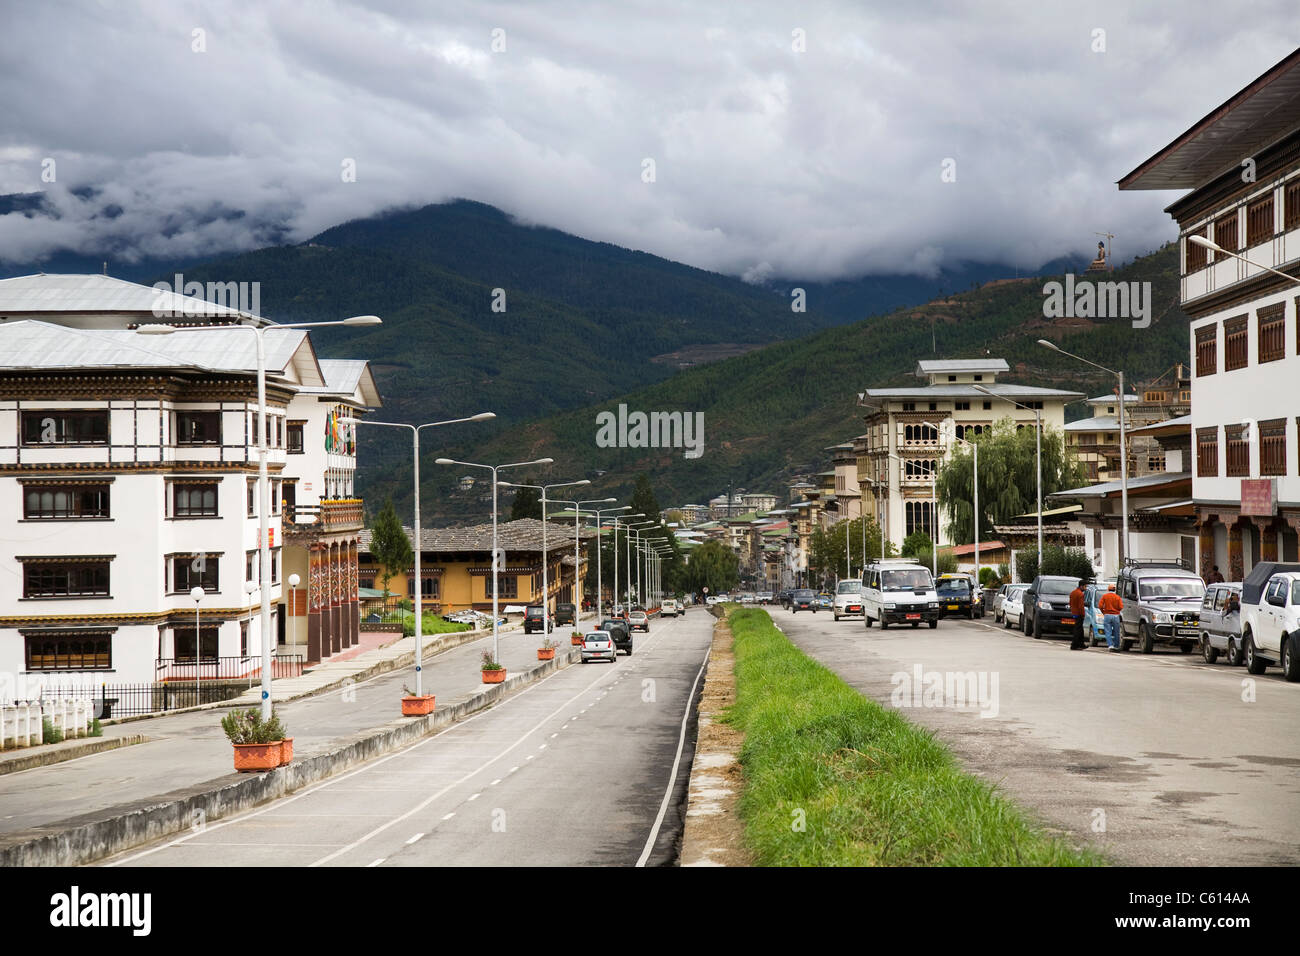 Traditional buildings and a clean road in the capital city of Thimphu. Bhutan Stock Photo